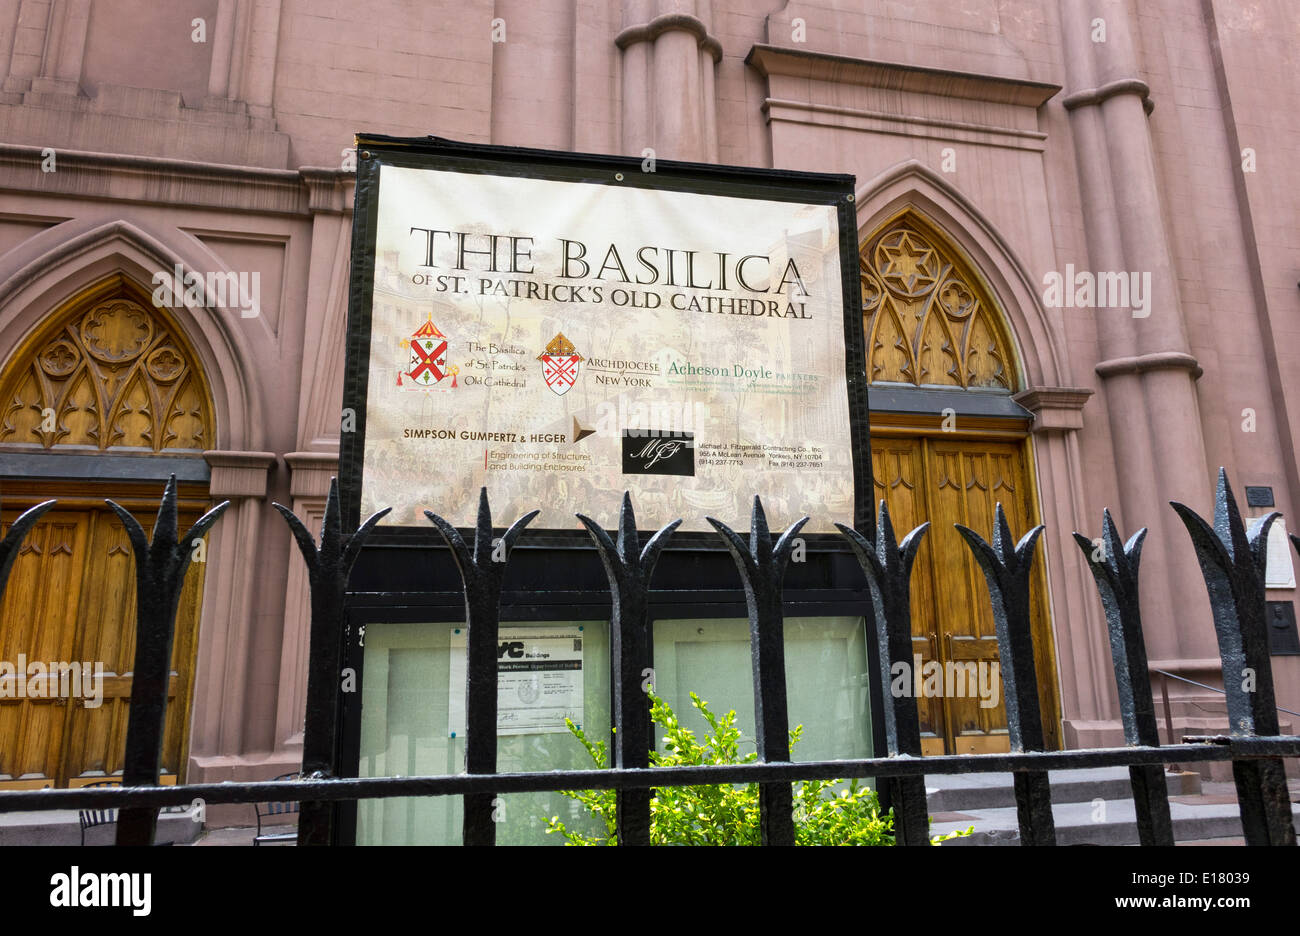 The Basilica of St. Patrick's Old Cathedral on Mott Street in Nolita in Lower Manhattan in New York City. Stock Photo